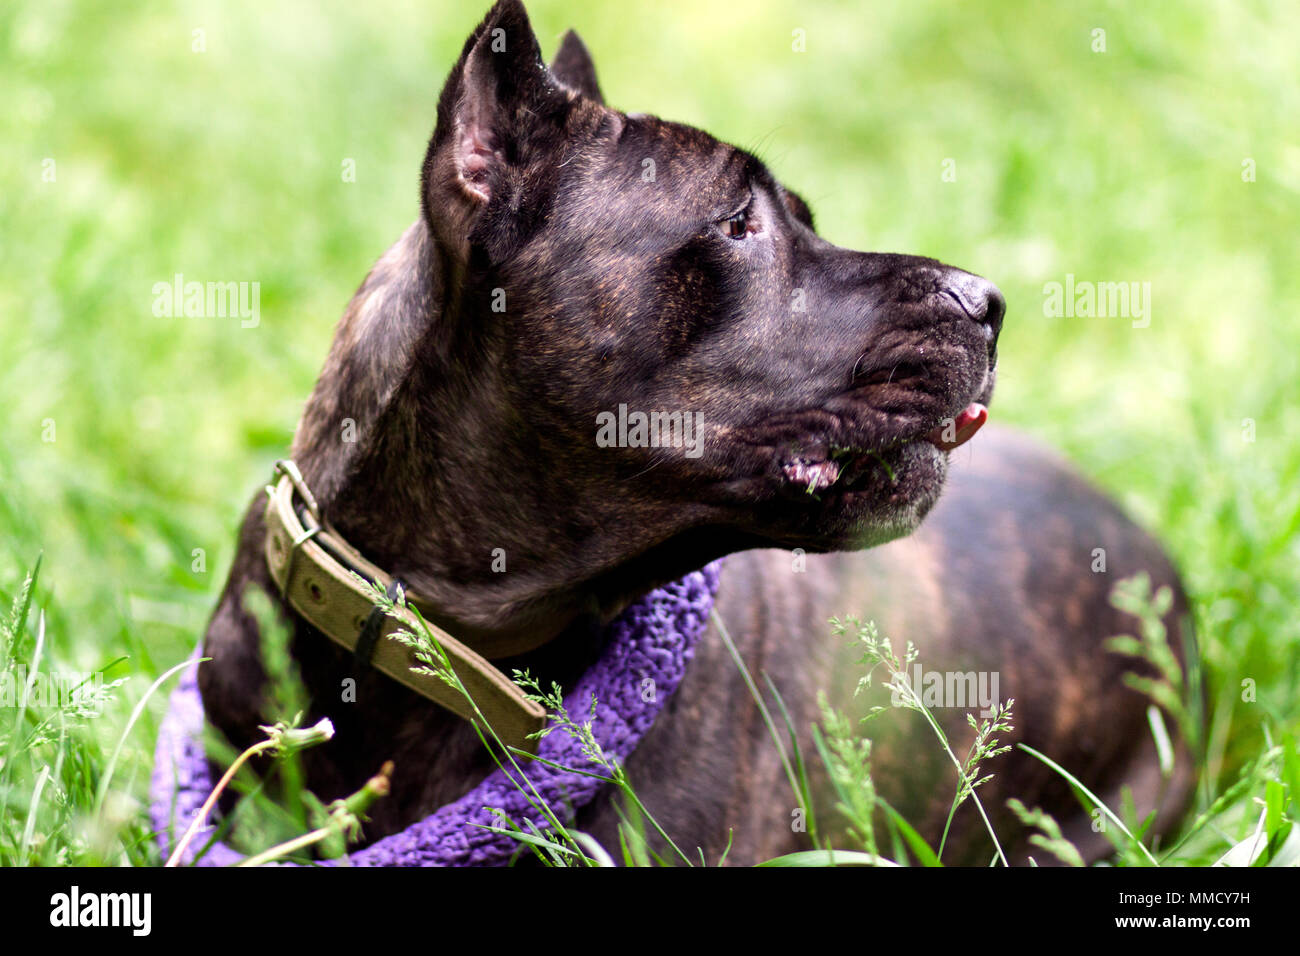 Young dog Cane Corso Italiano lies on the green grass outdoors. The breed of a big dog. Summer season Stock Photo